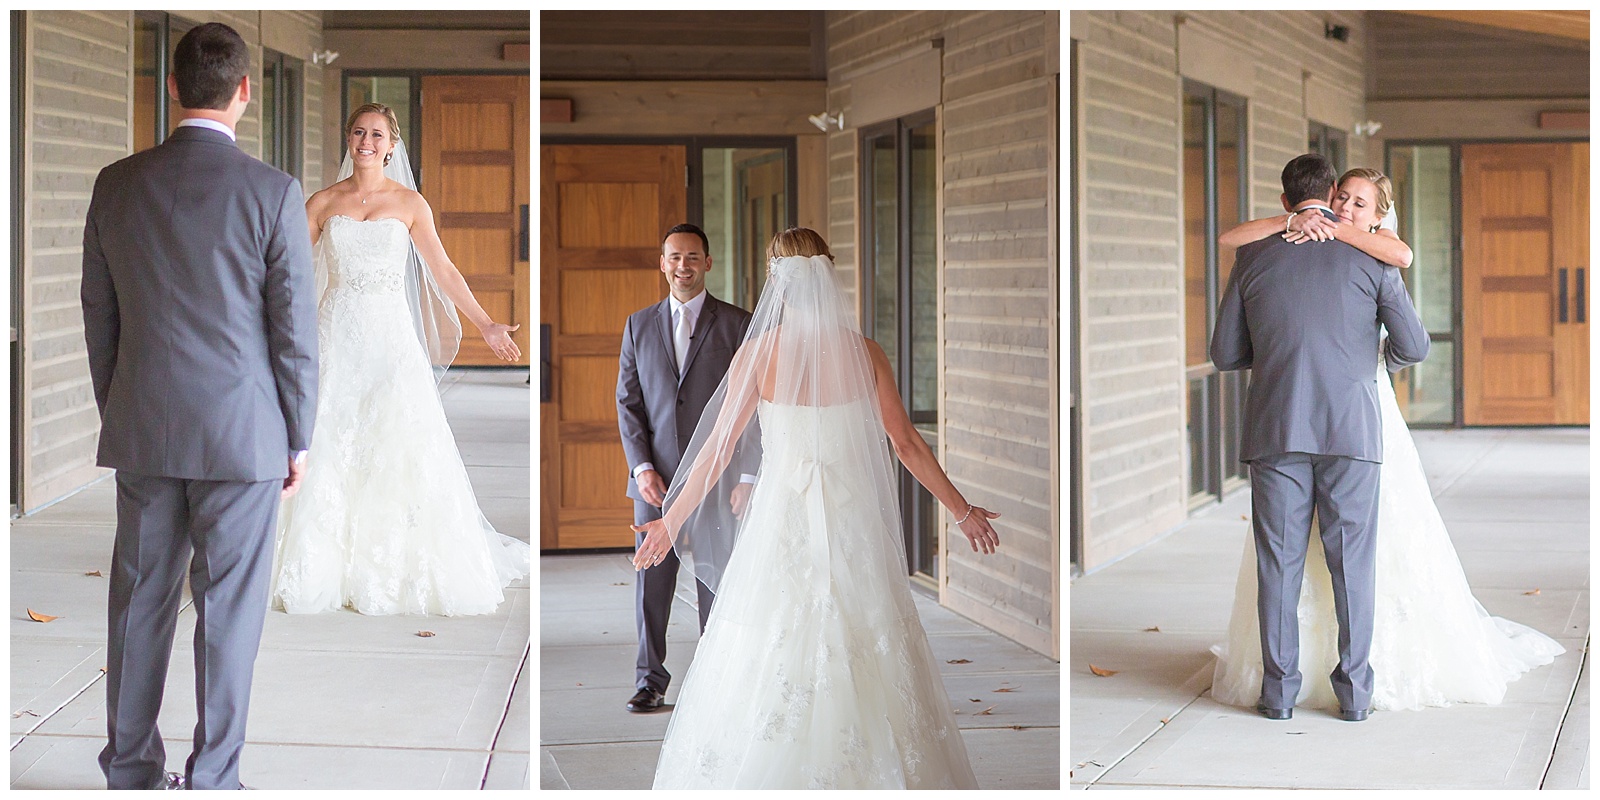 Wedding photography at Milburn Country Club in Overland Park, Kansas.